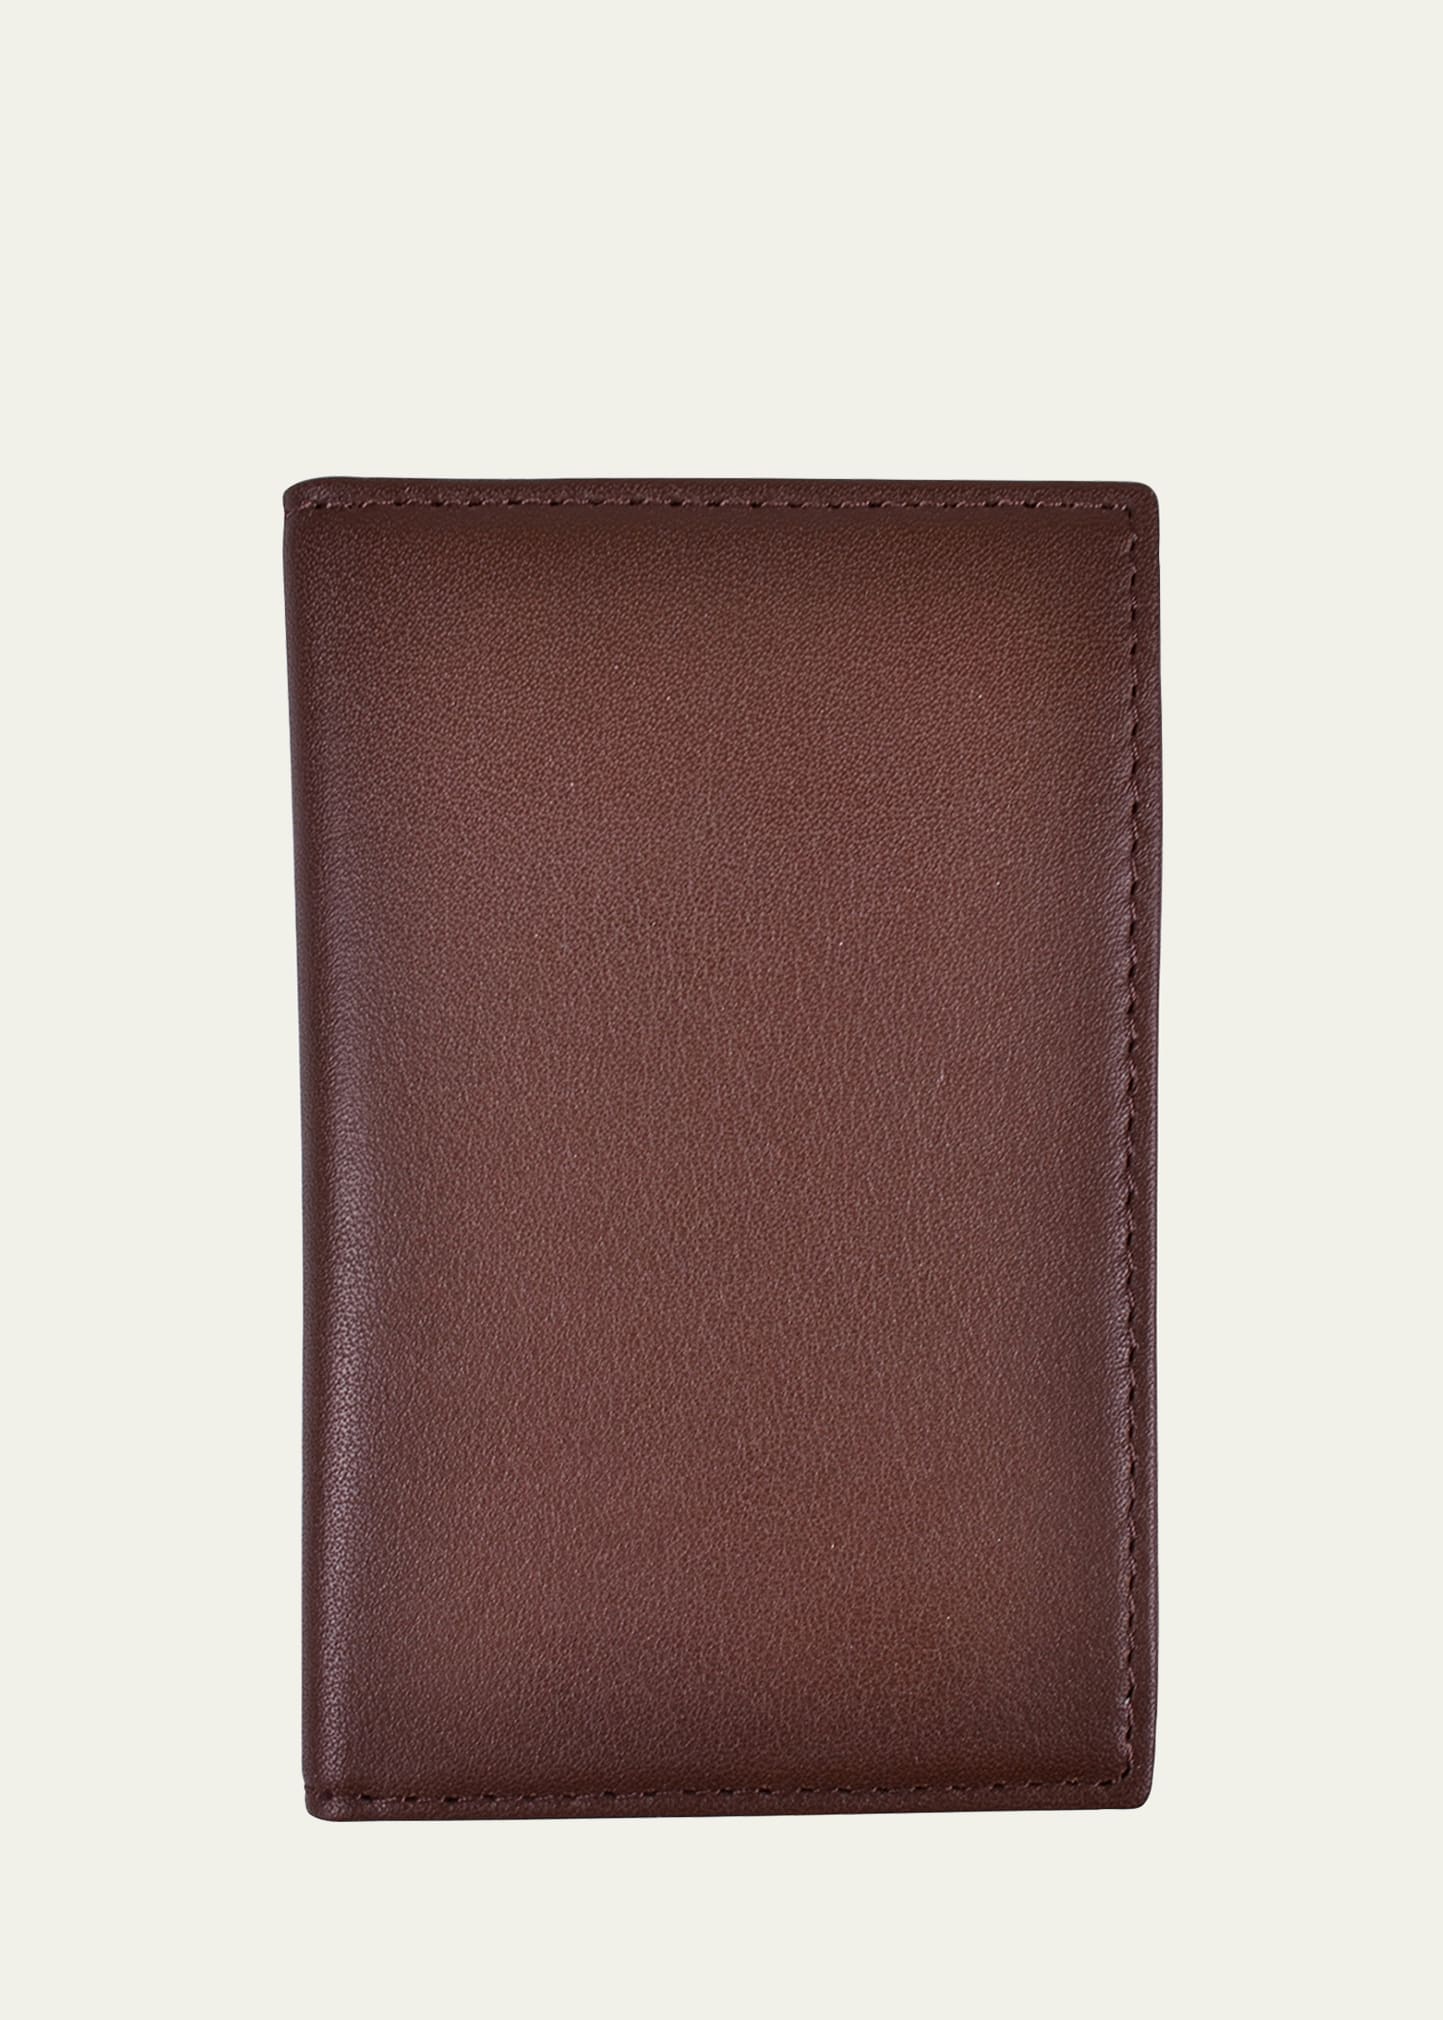 Royce New York Personalized Leather Rfid-blocking Card Holder In Brown